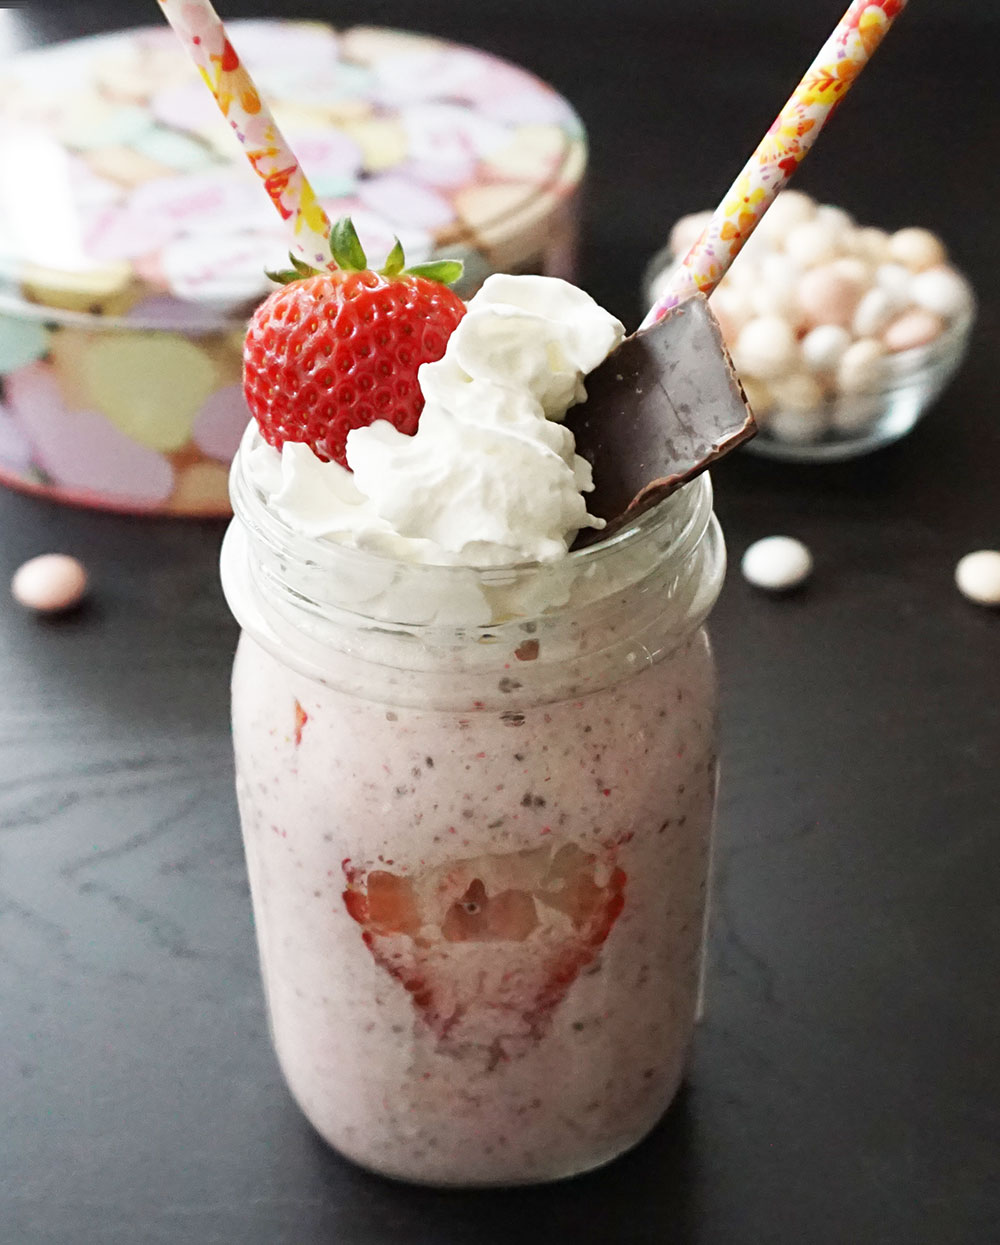 Strawberry passion fruit smoothie from @bijouxandbits